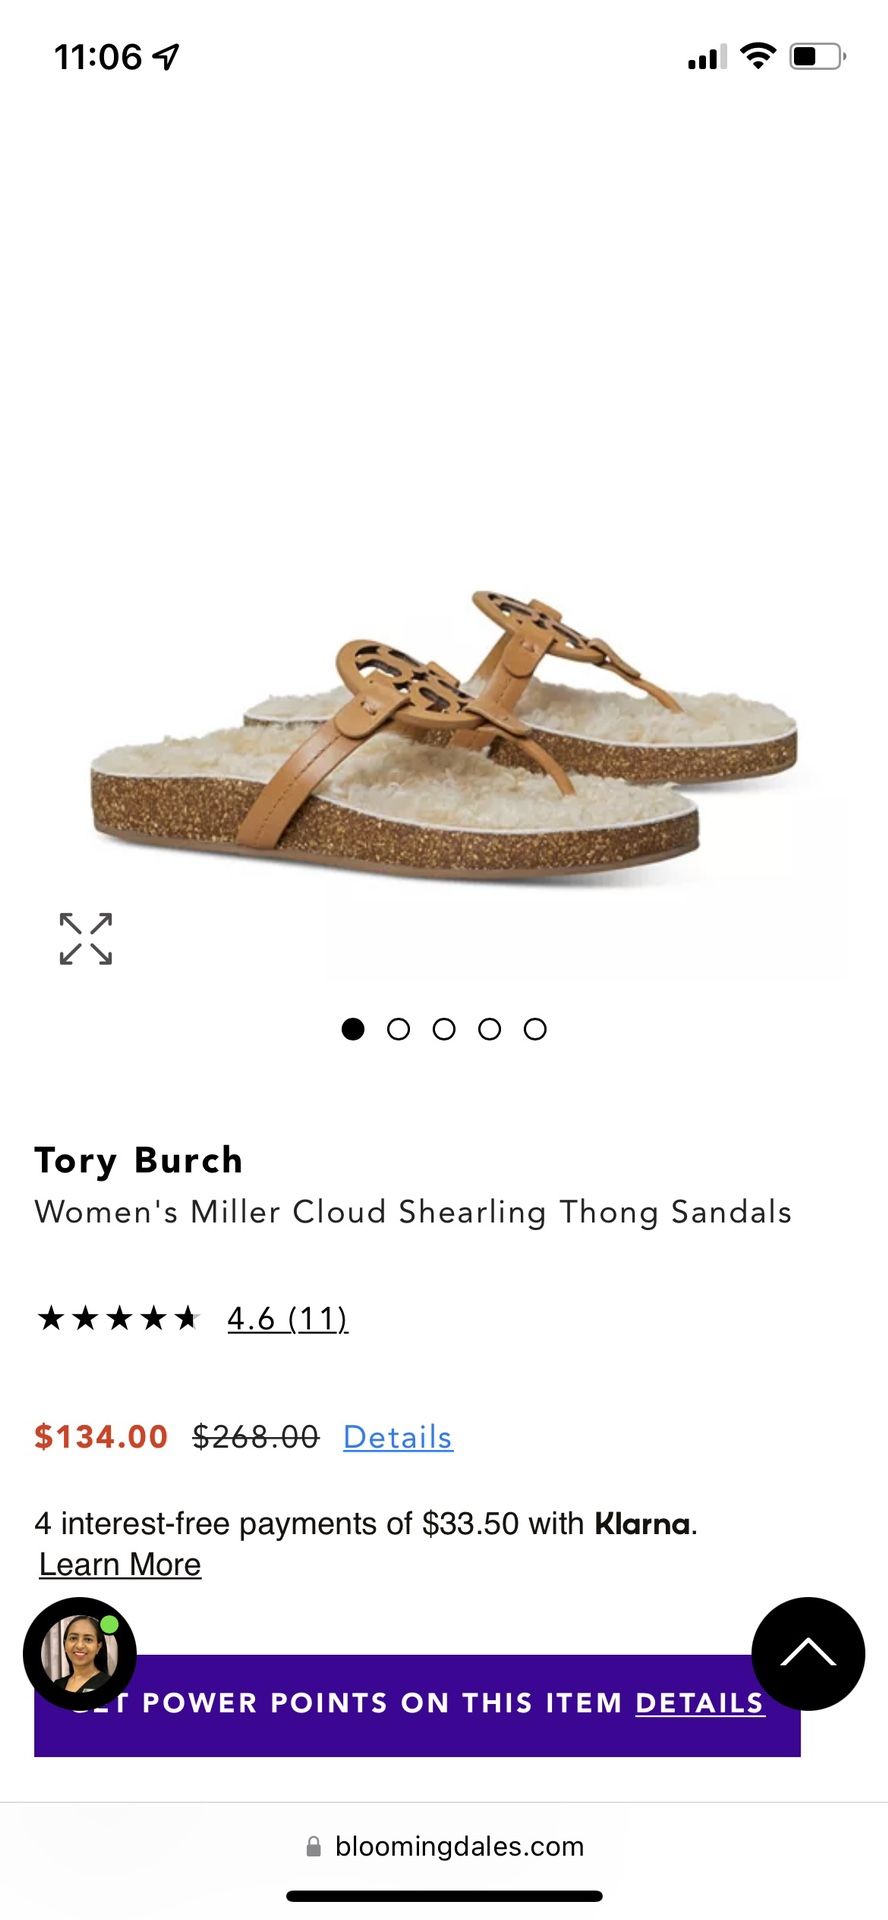 NEW Authentic Tory Burch Shearling Sandals Size 8